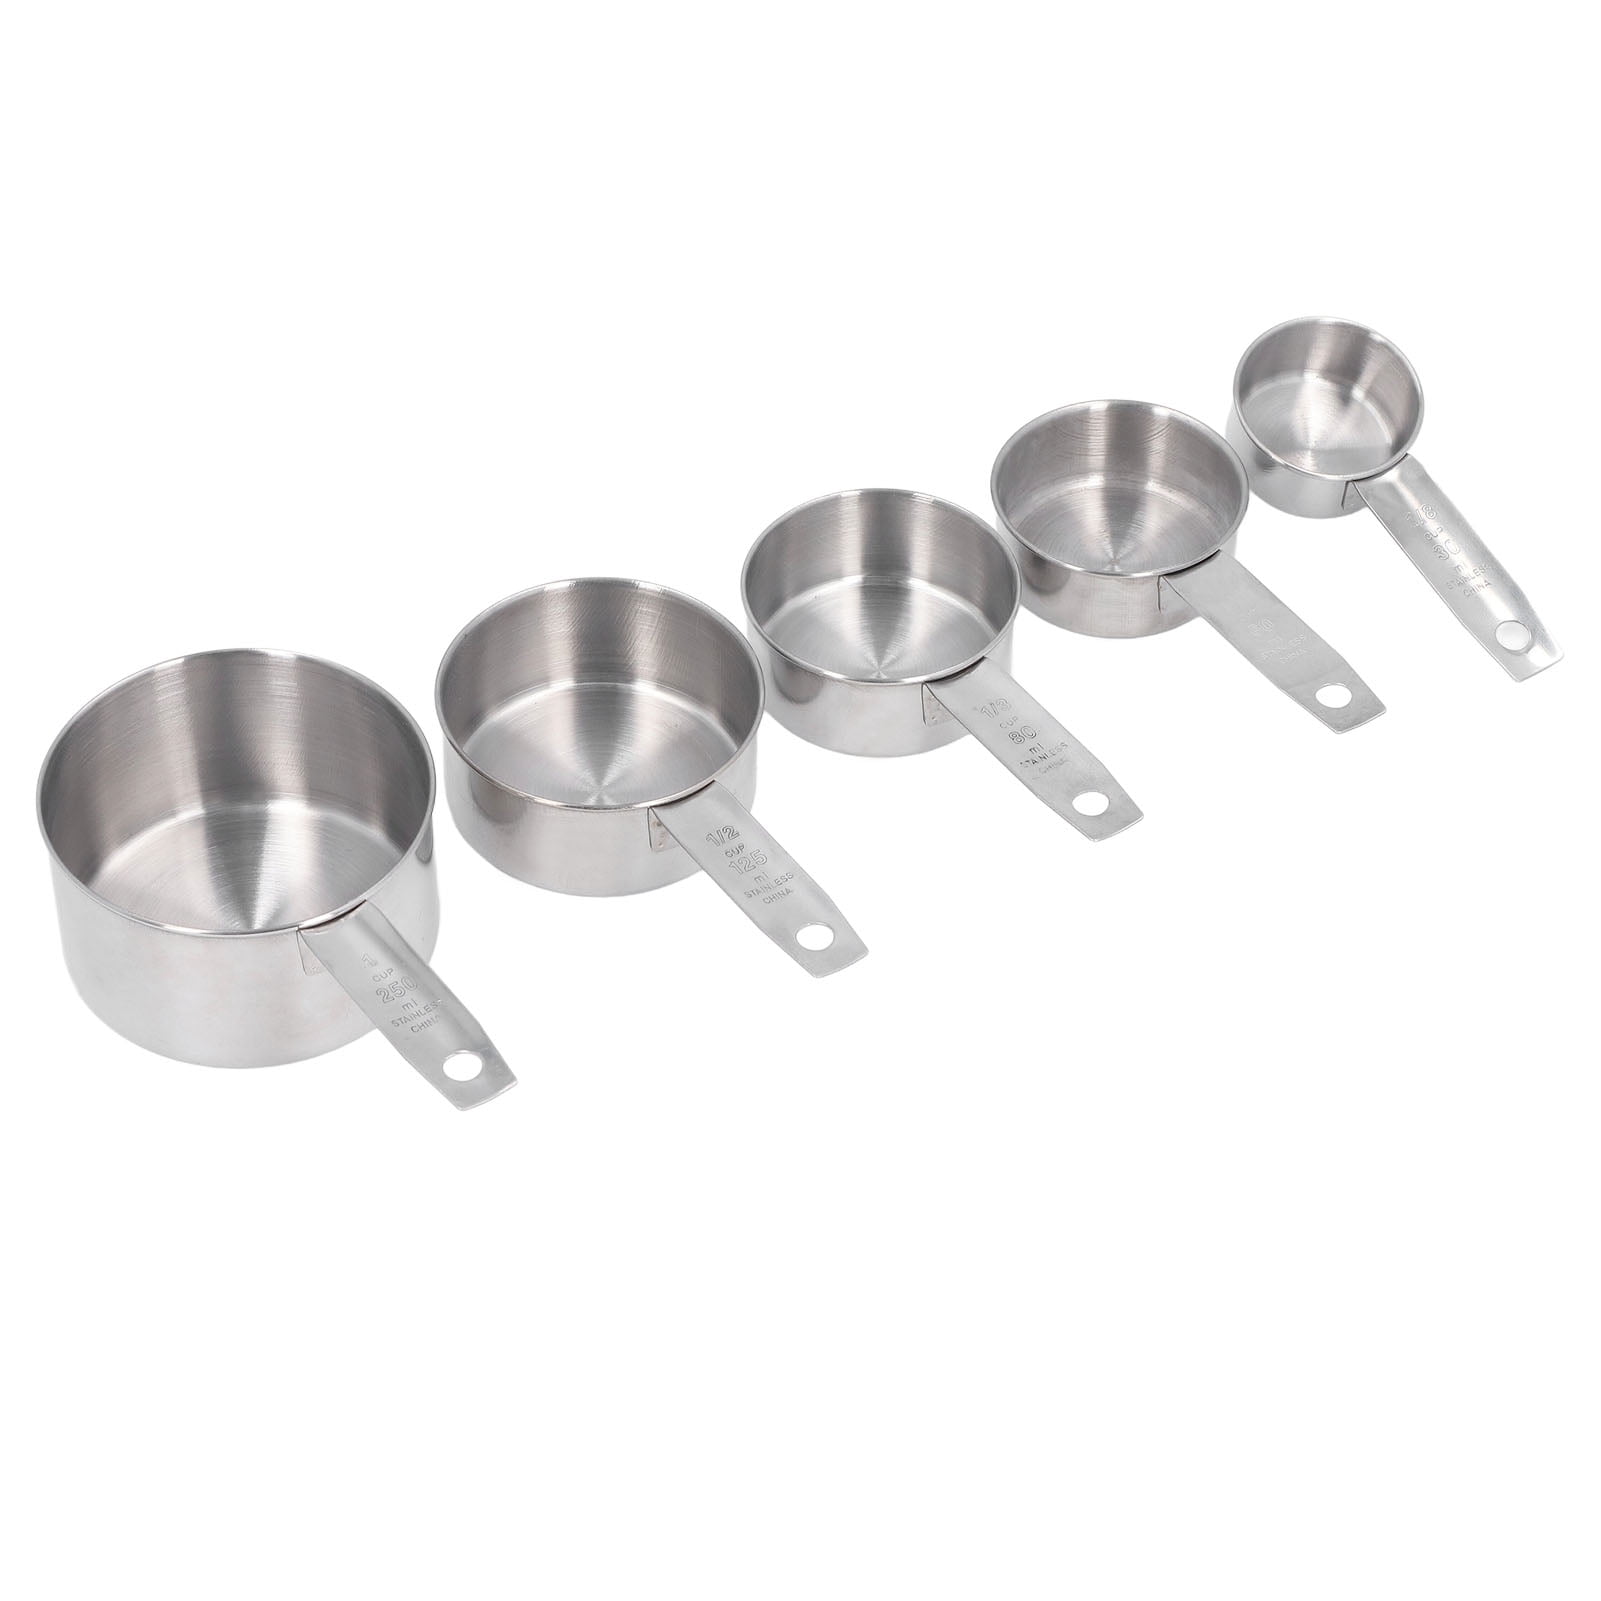 Last Confection 7pc Stainless Steel Measuring Cup Set - Includes 1/8 Cup  Coffee Scoop - Measurements for Dry and Liquid Cooking & Baking Ingredients